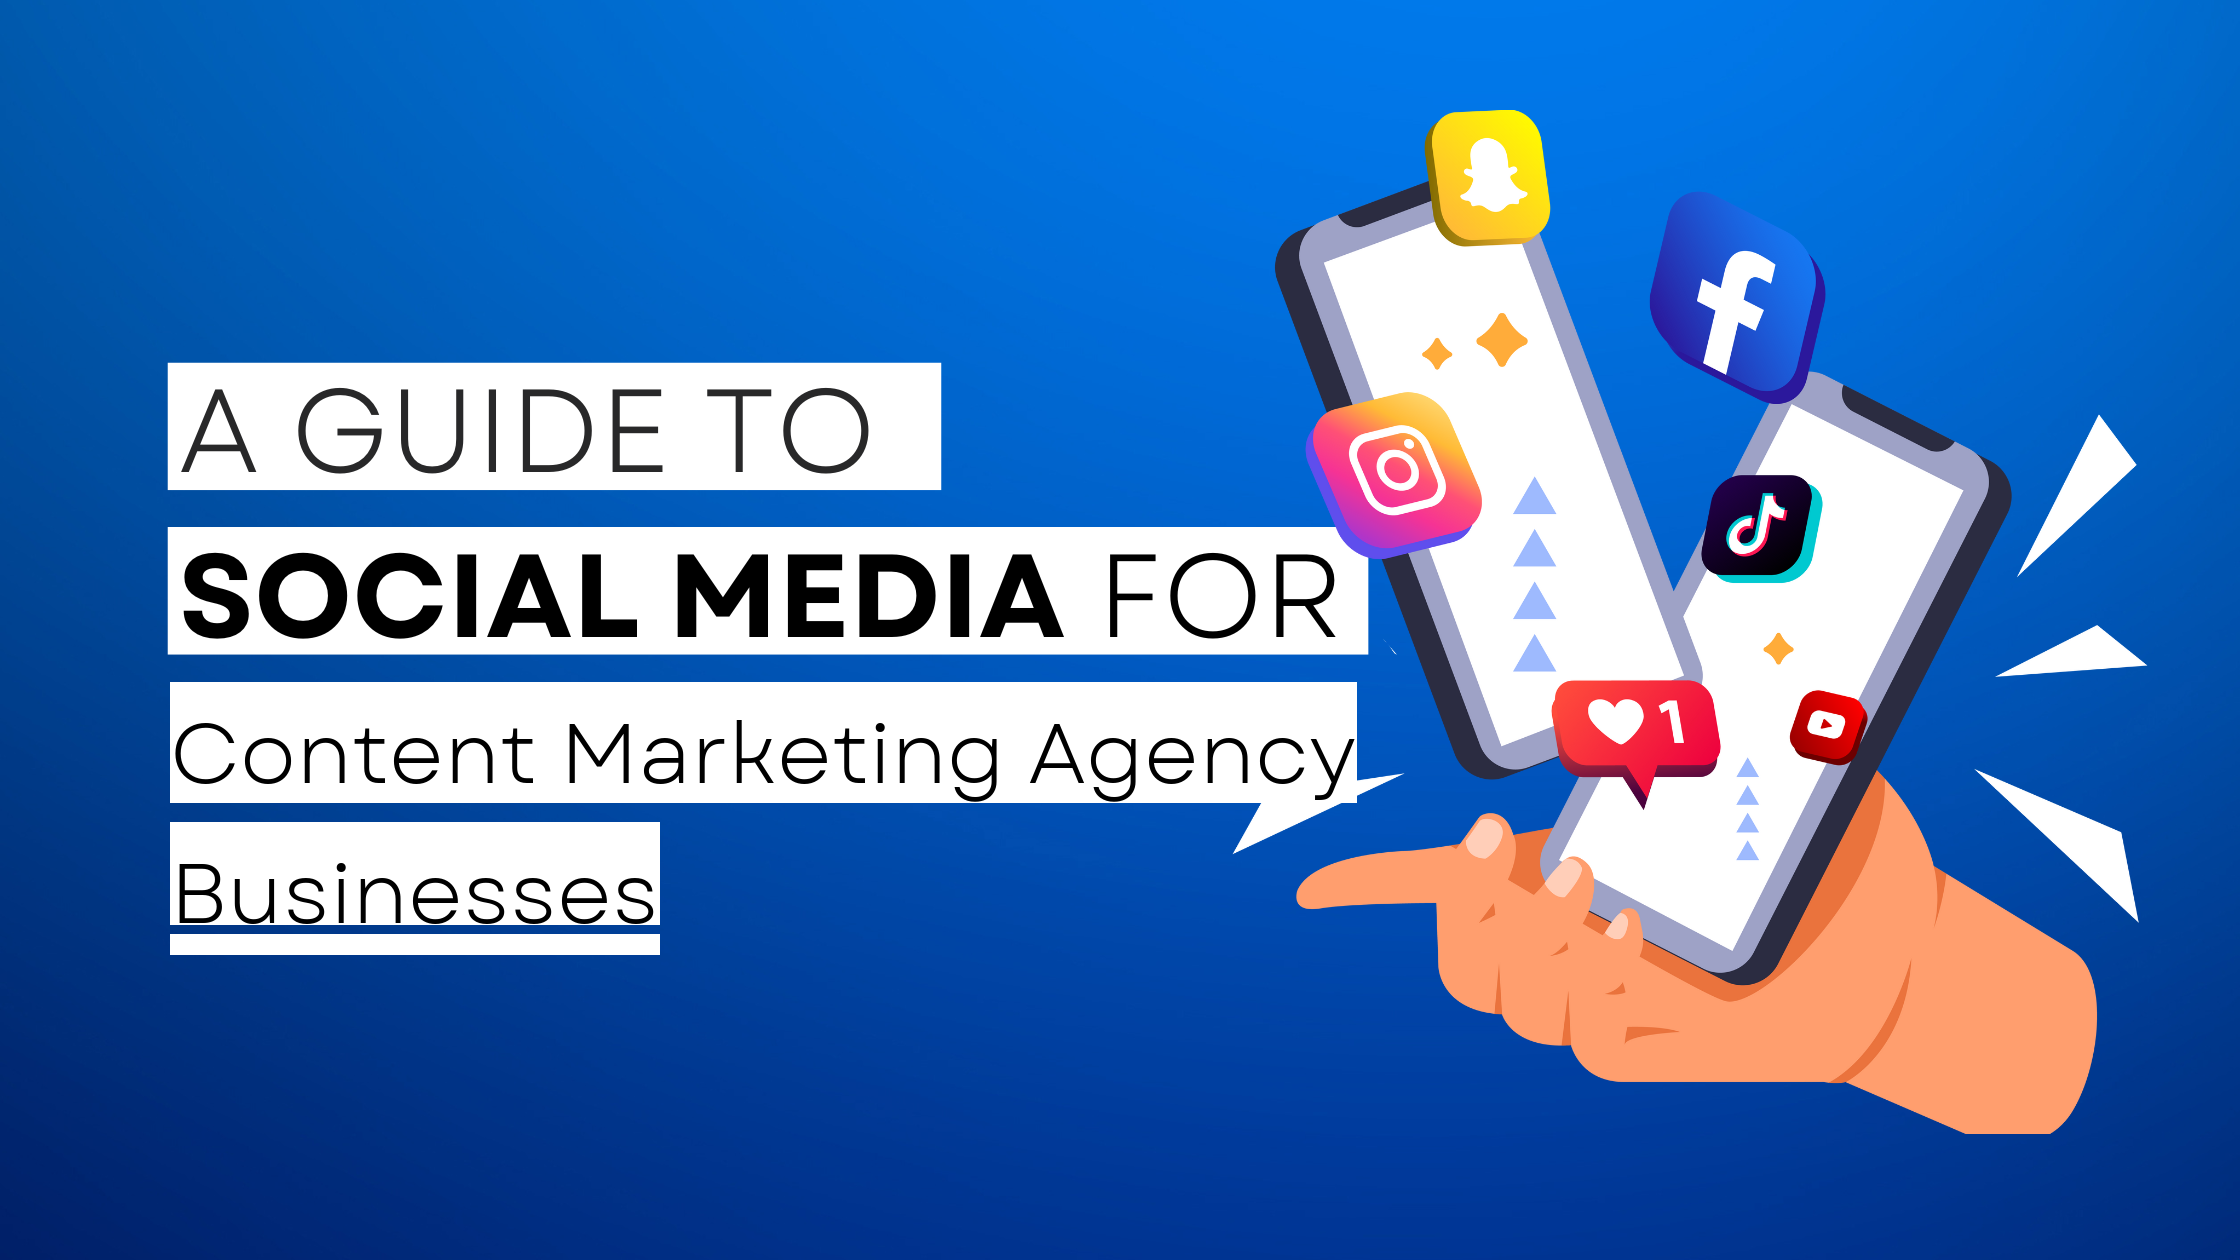 How to start Content Marketing Agency on social media